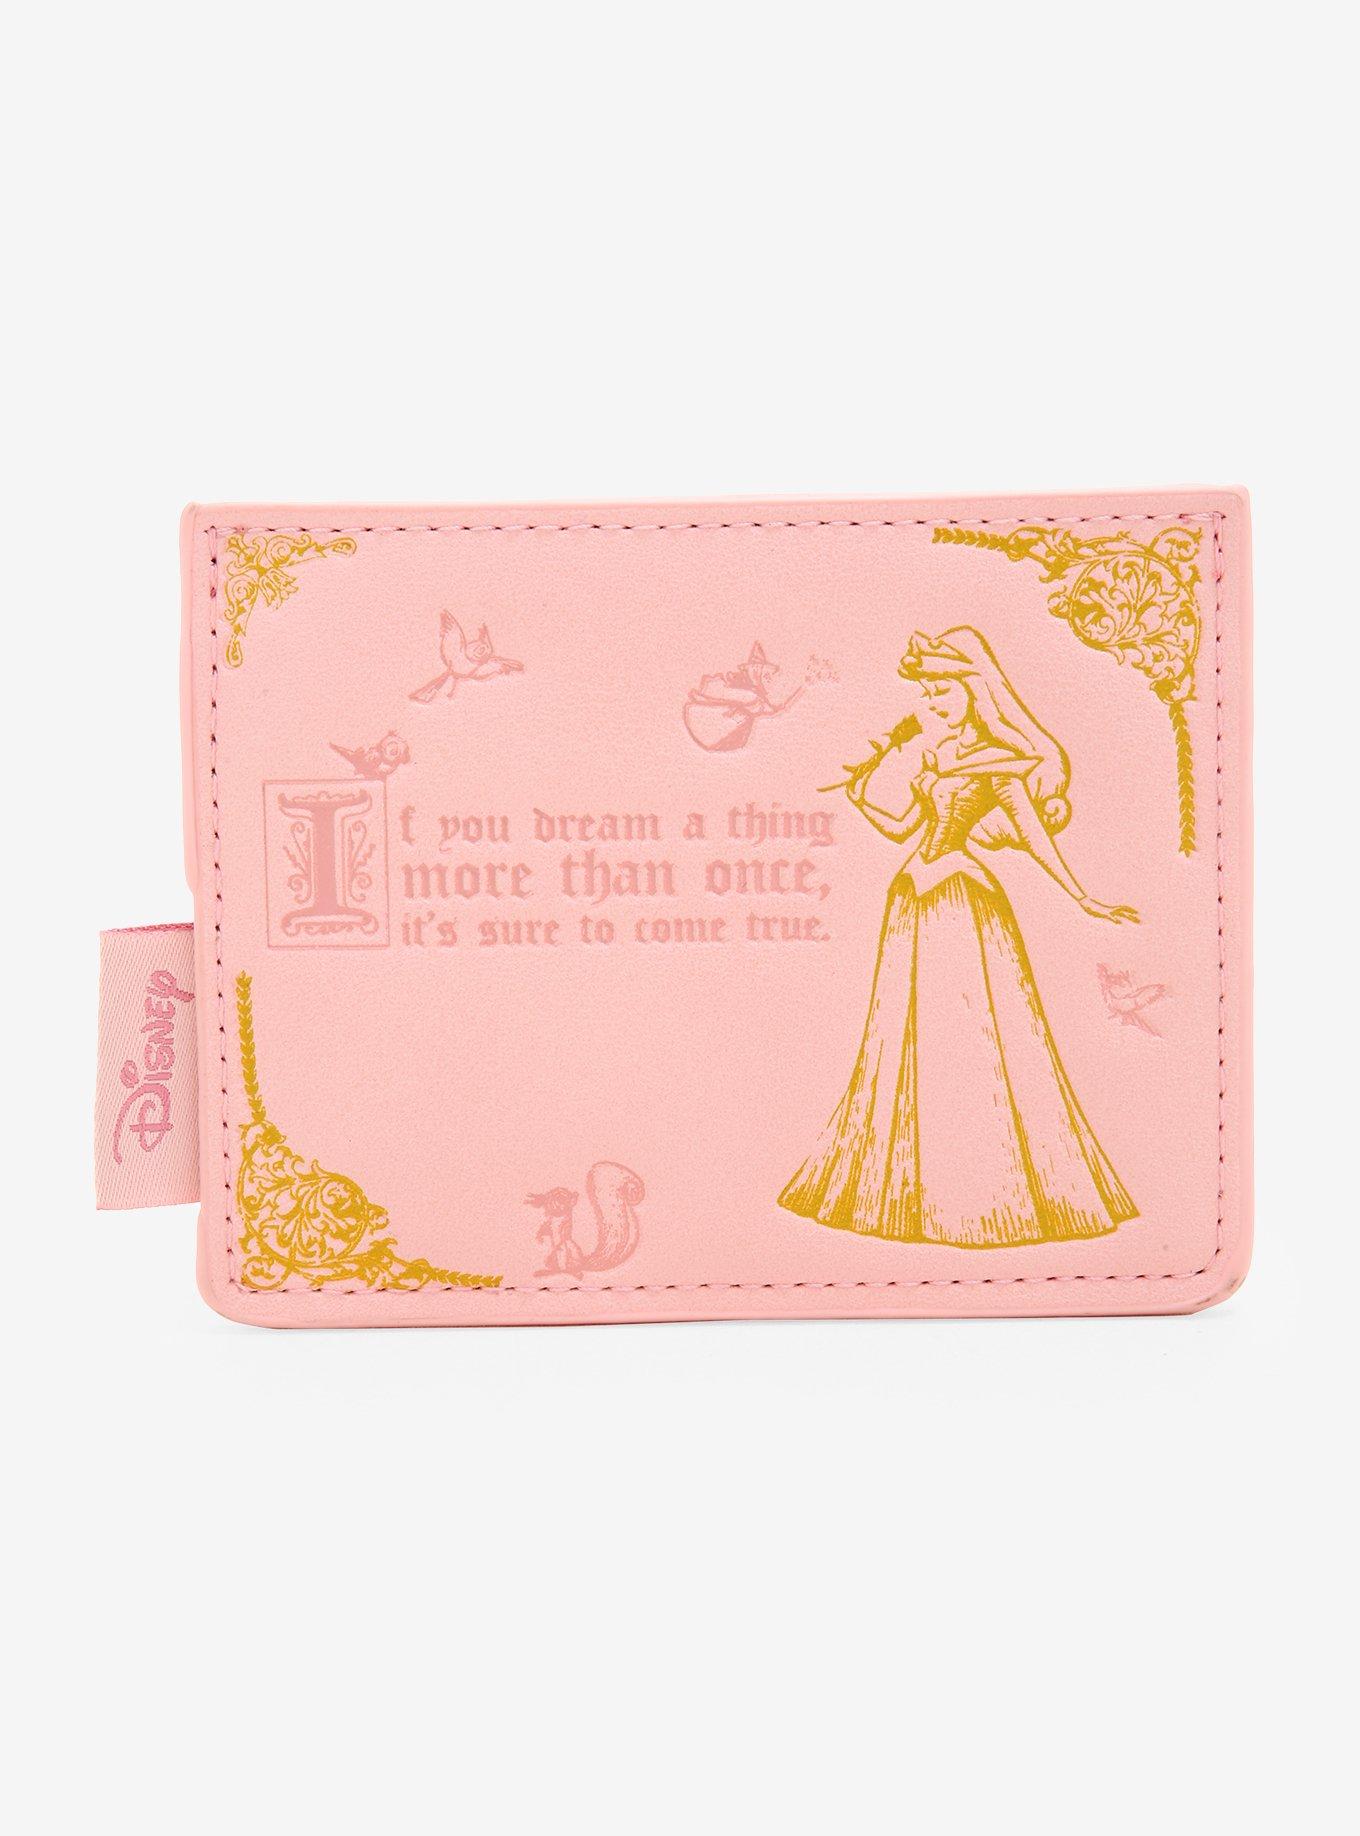 Loungefly Disney Sleeping Beauty Floral Cardholder - BoxLunch Exclusive